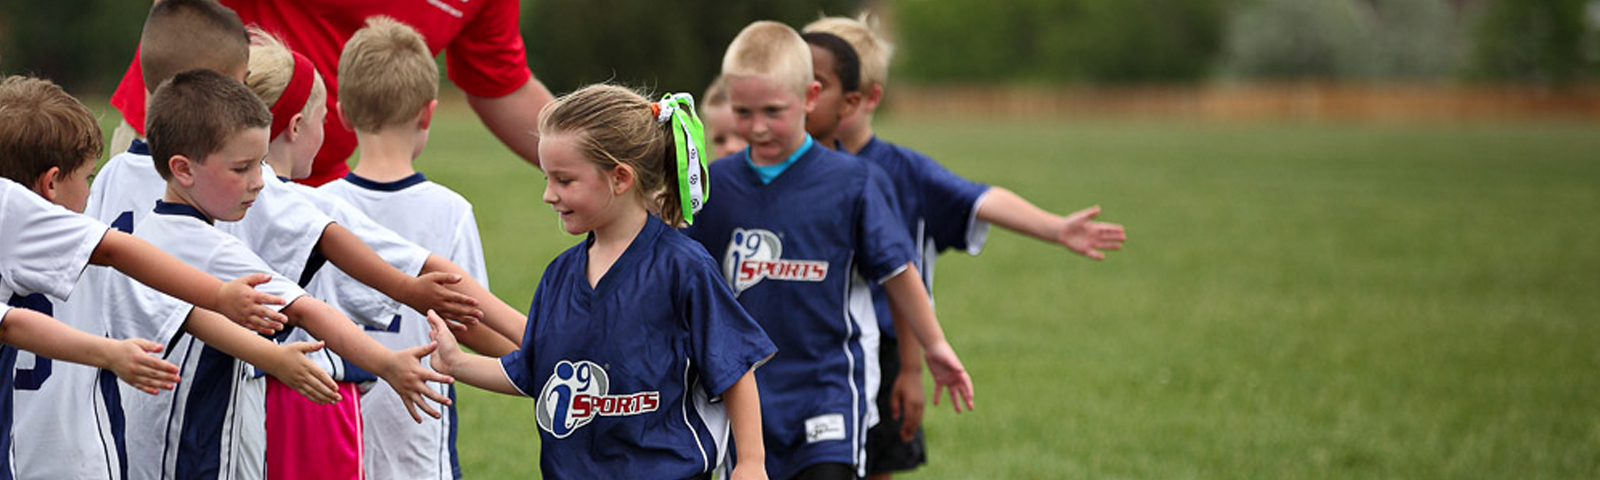 Hurt or be Hurt- Youth Sports No Longer a Game